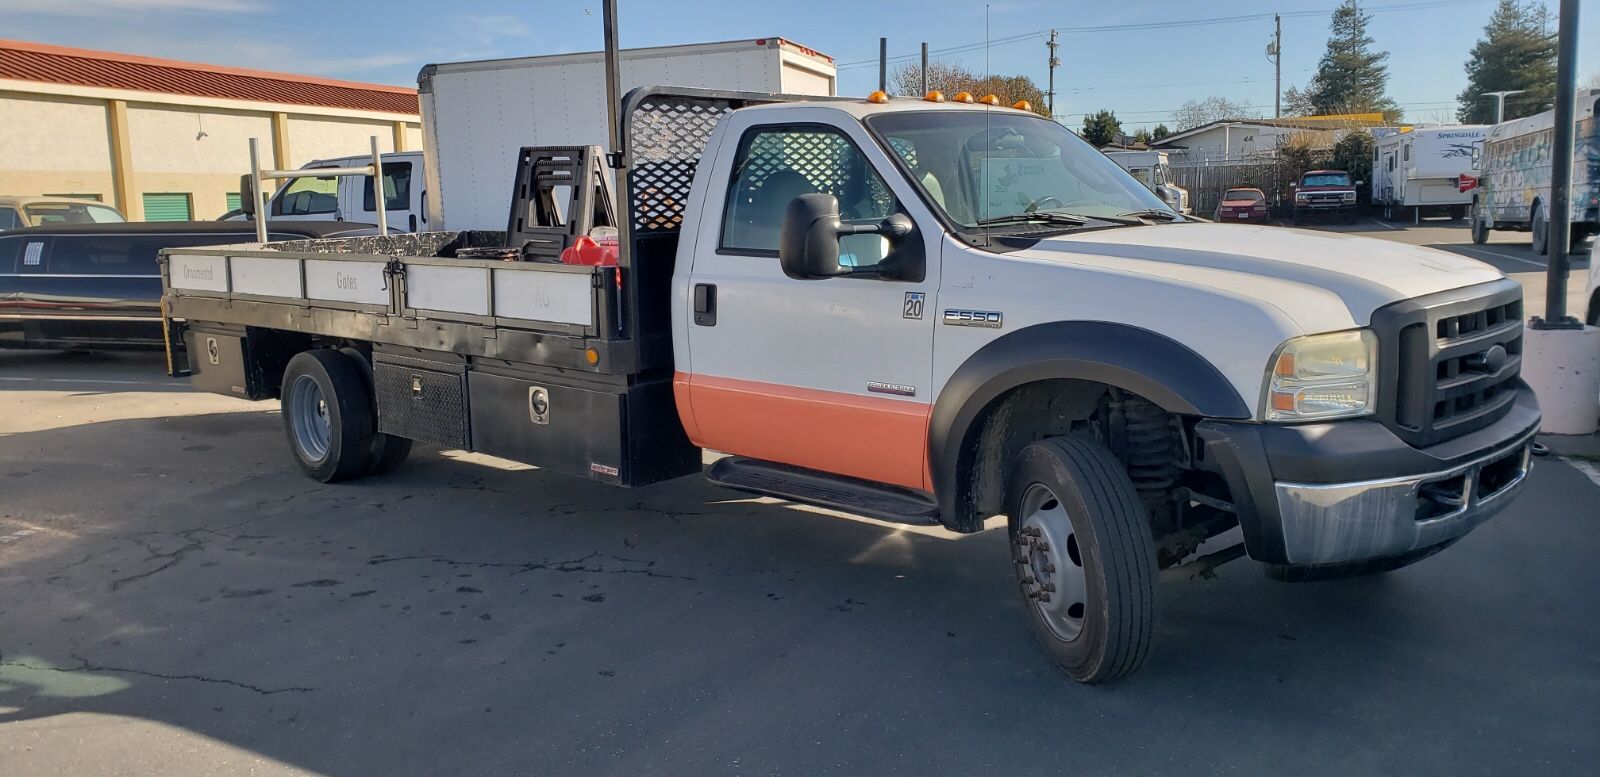 FlatBed truck Ford.550 Diesel $10,000